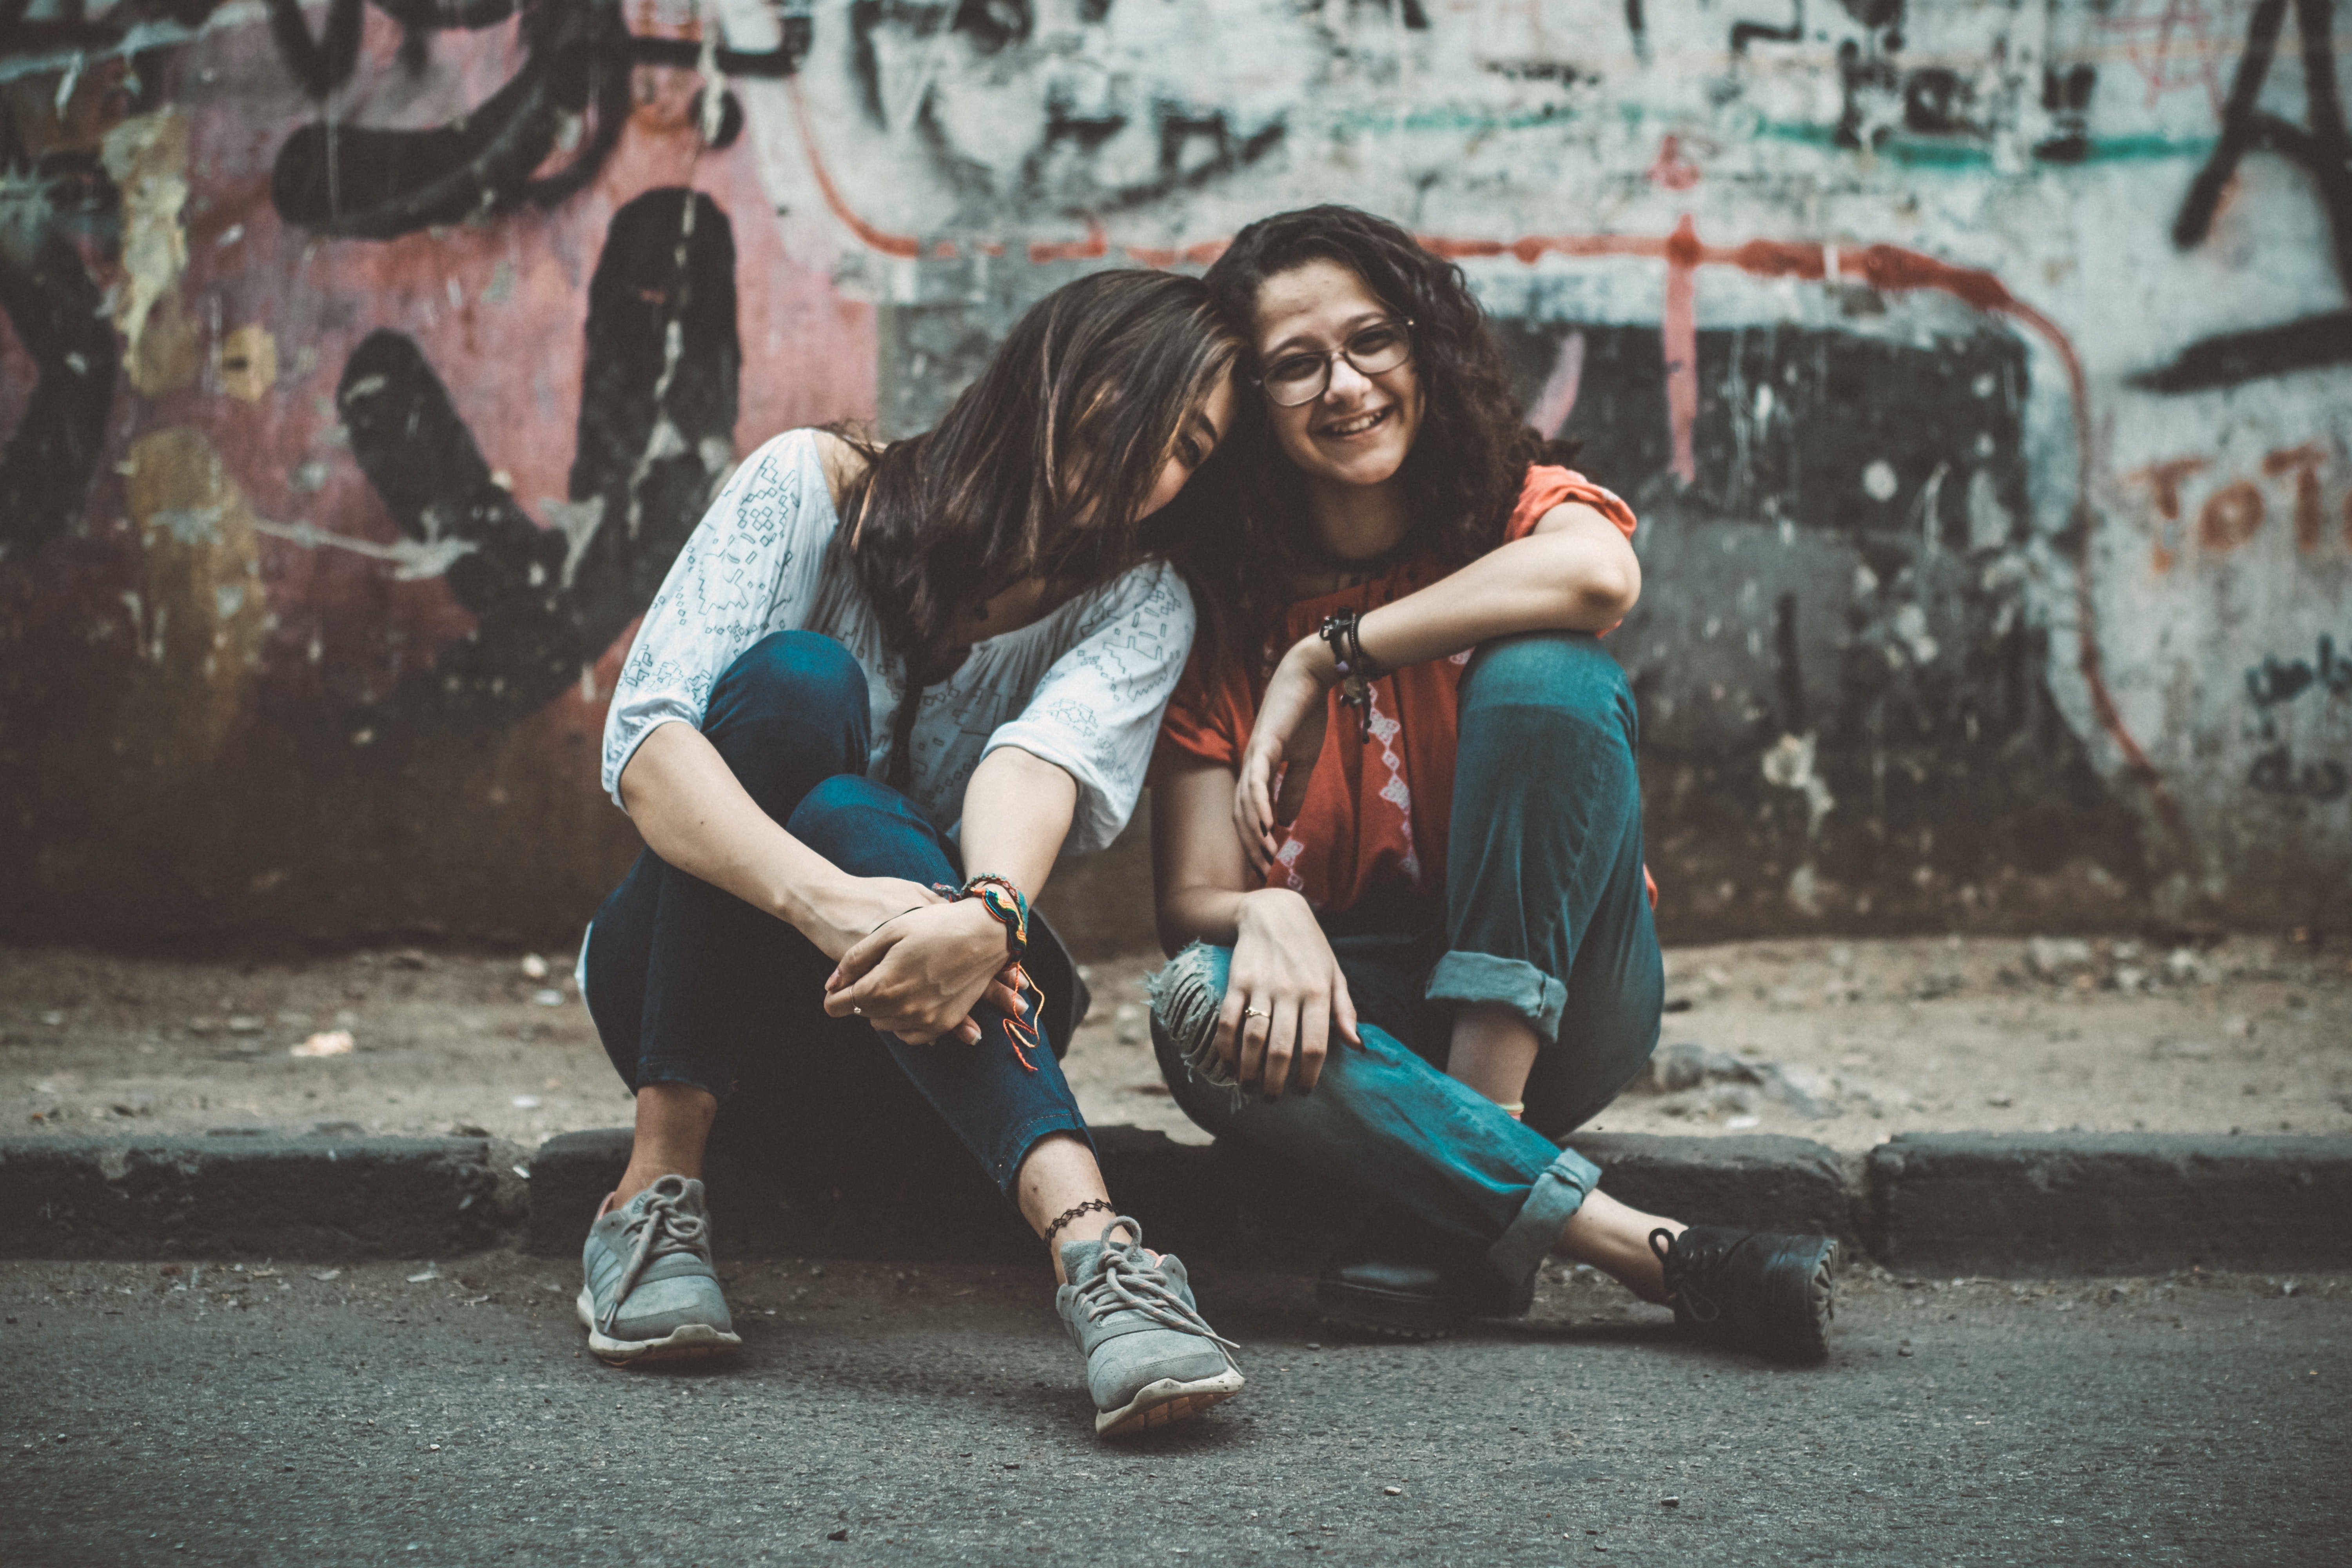 Two girls hanging out. | Source: Pexels/Bahaa A. Shawqi